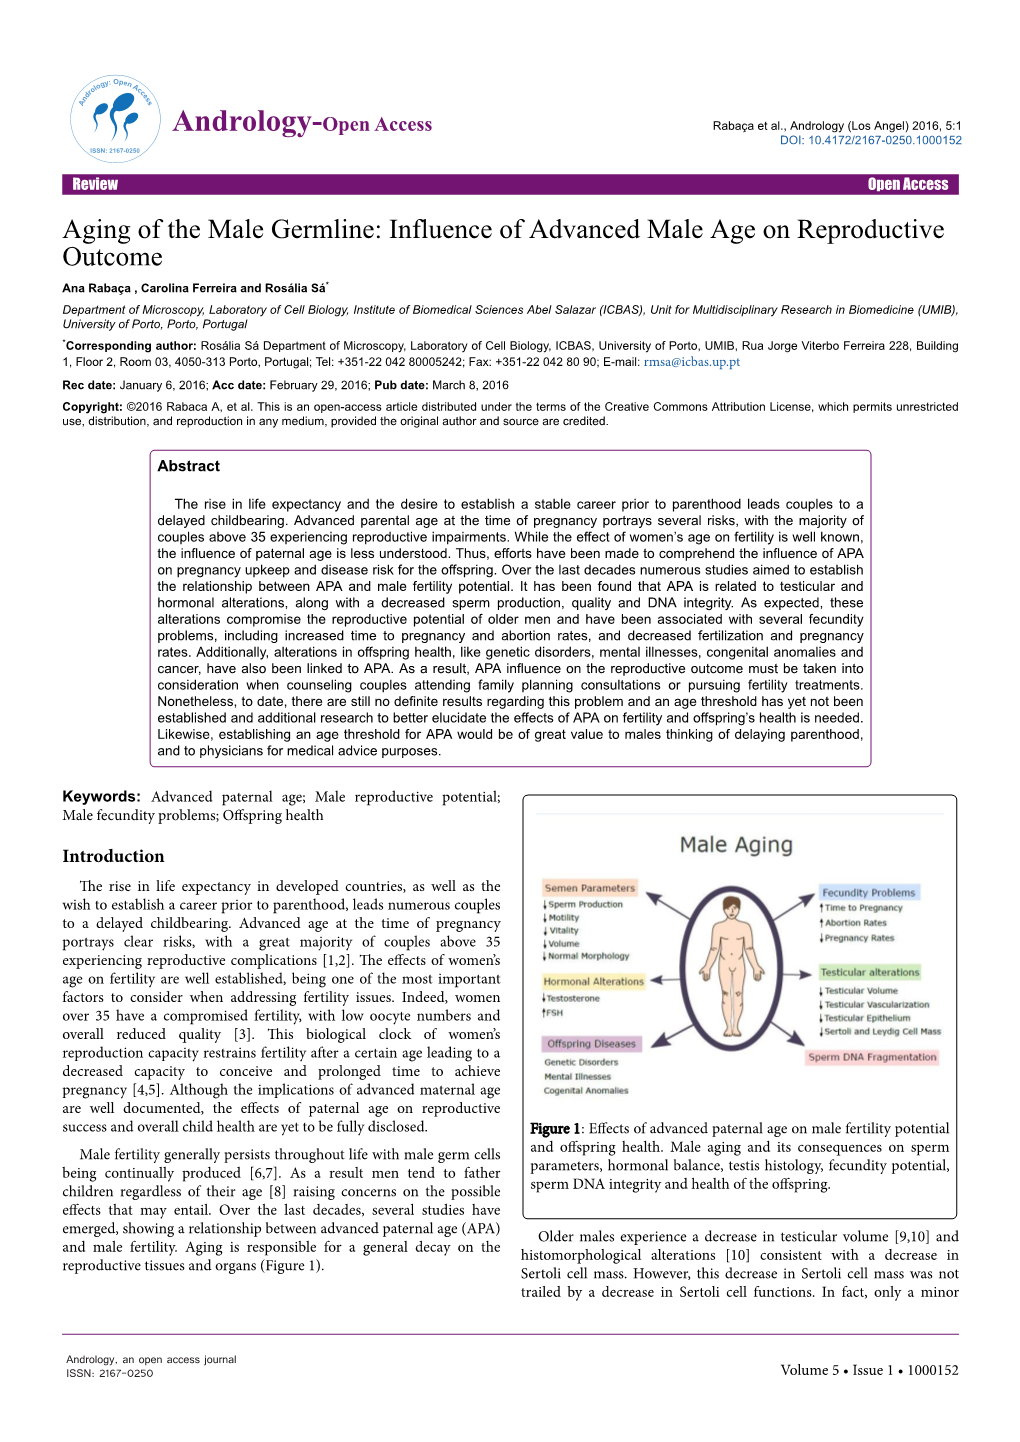 Aging of the Male Germline: Influence of Advanced Male Age On